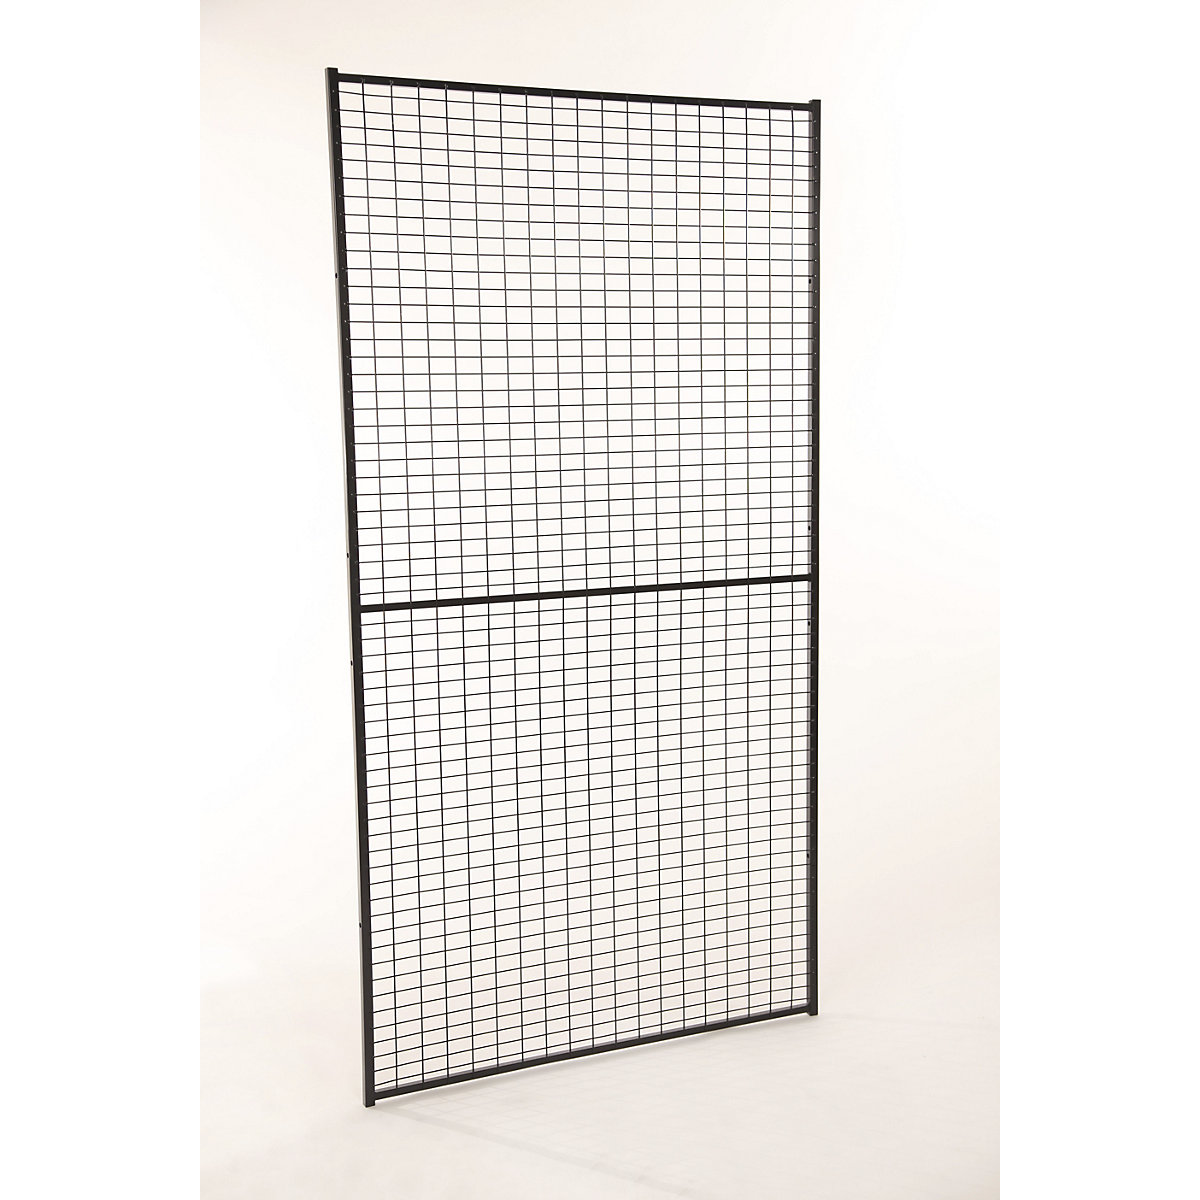 X-GUARD LITE machine protective fencing, wall section – Axelent, height 2200 mm, width 900 mm-8